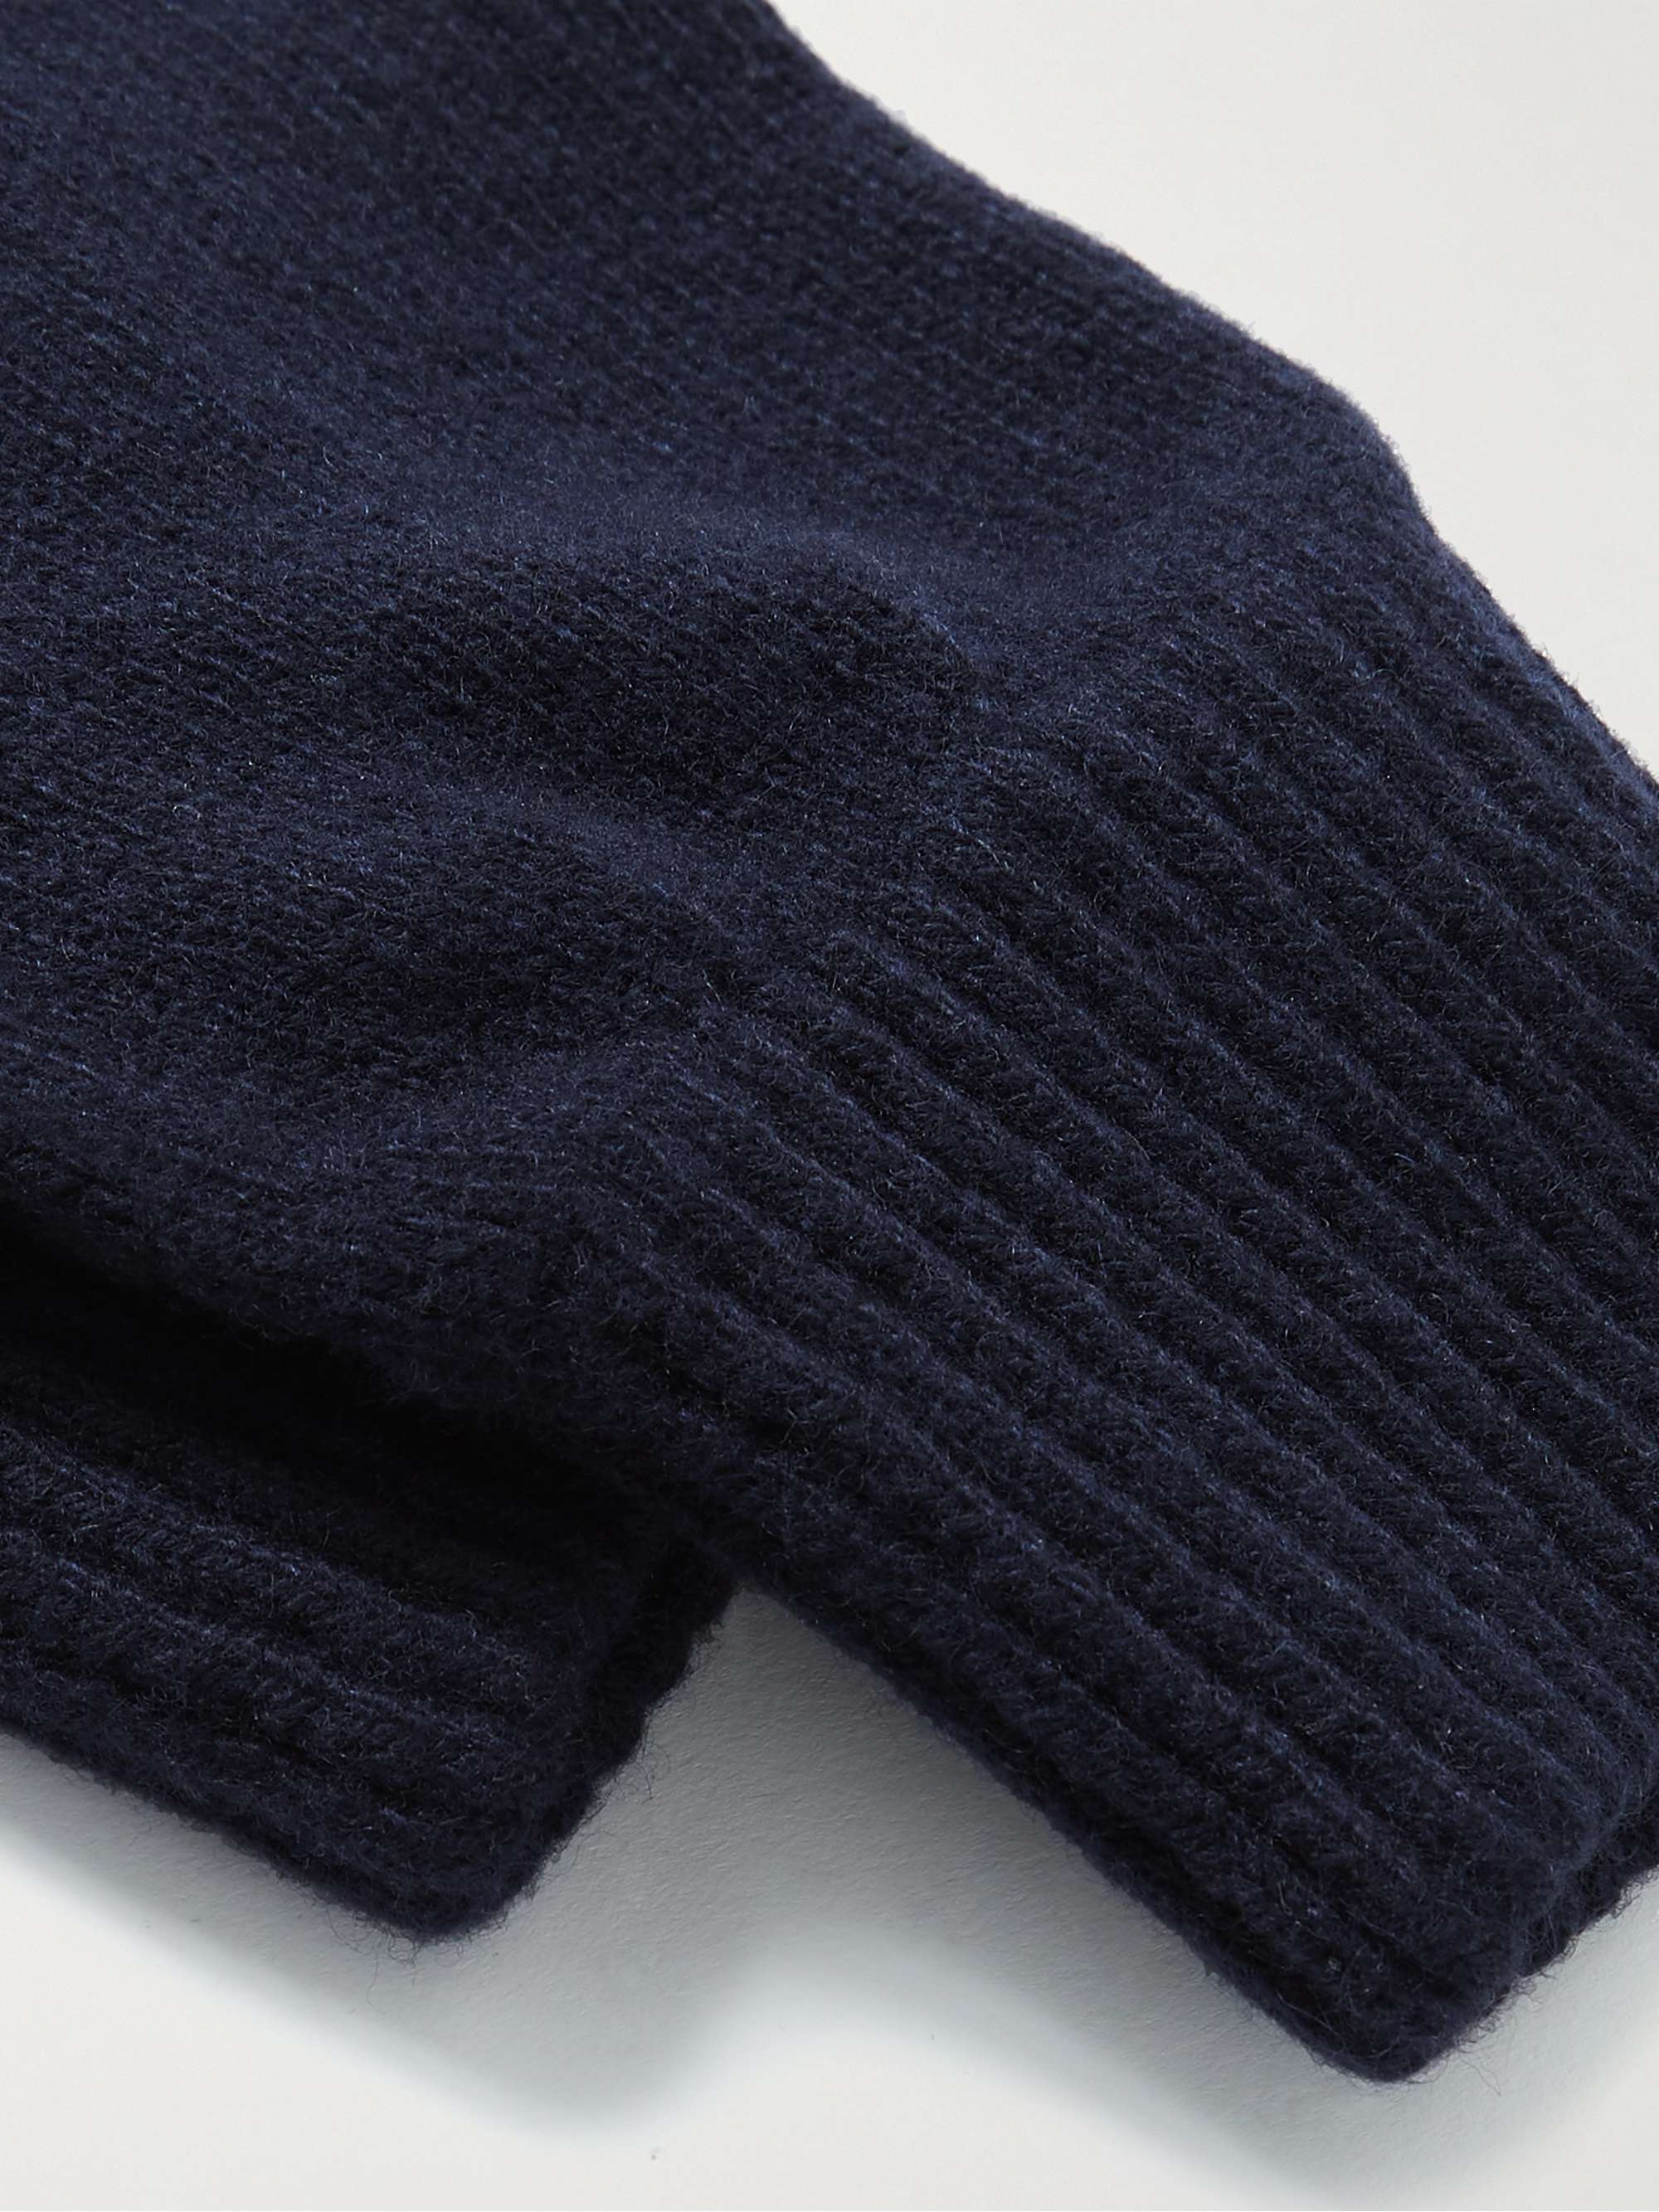 SUNSPEL Recycled Cashmere Gloves